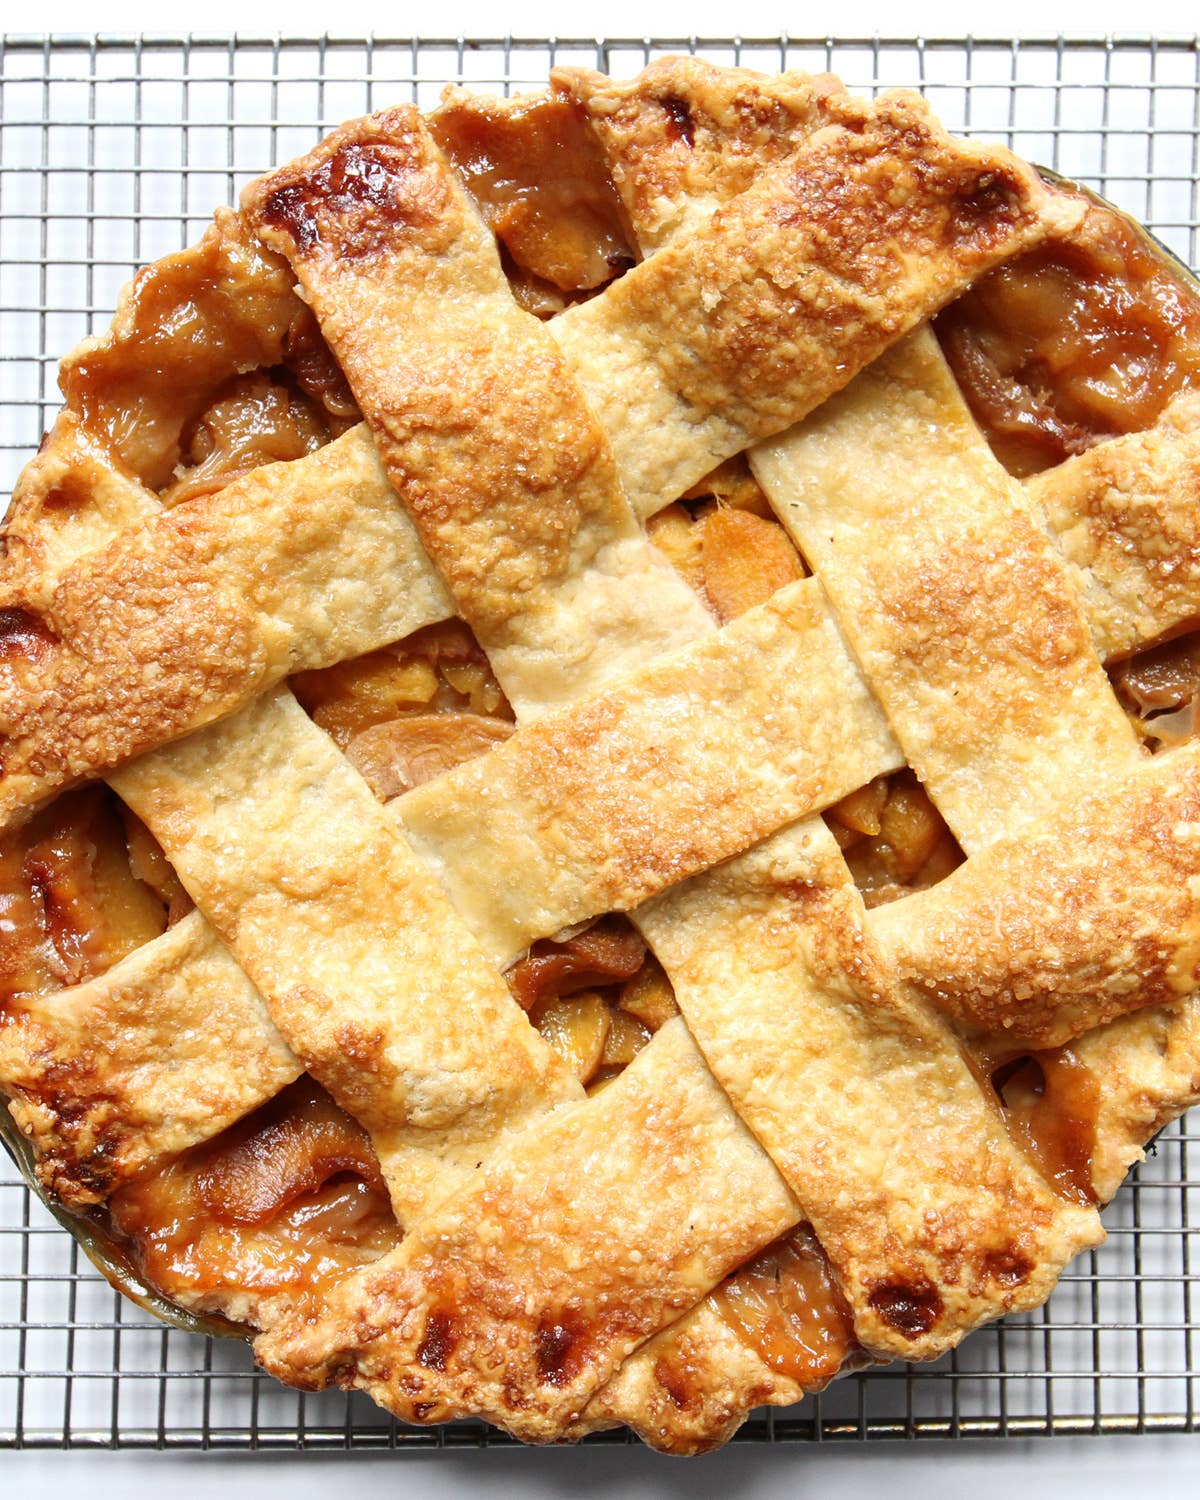 I Made Pie with SAVEUR’s Food Editor and This Is What I Learned